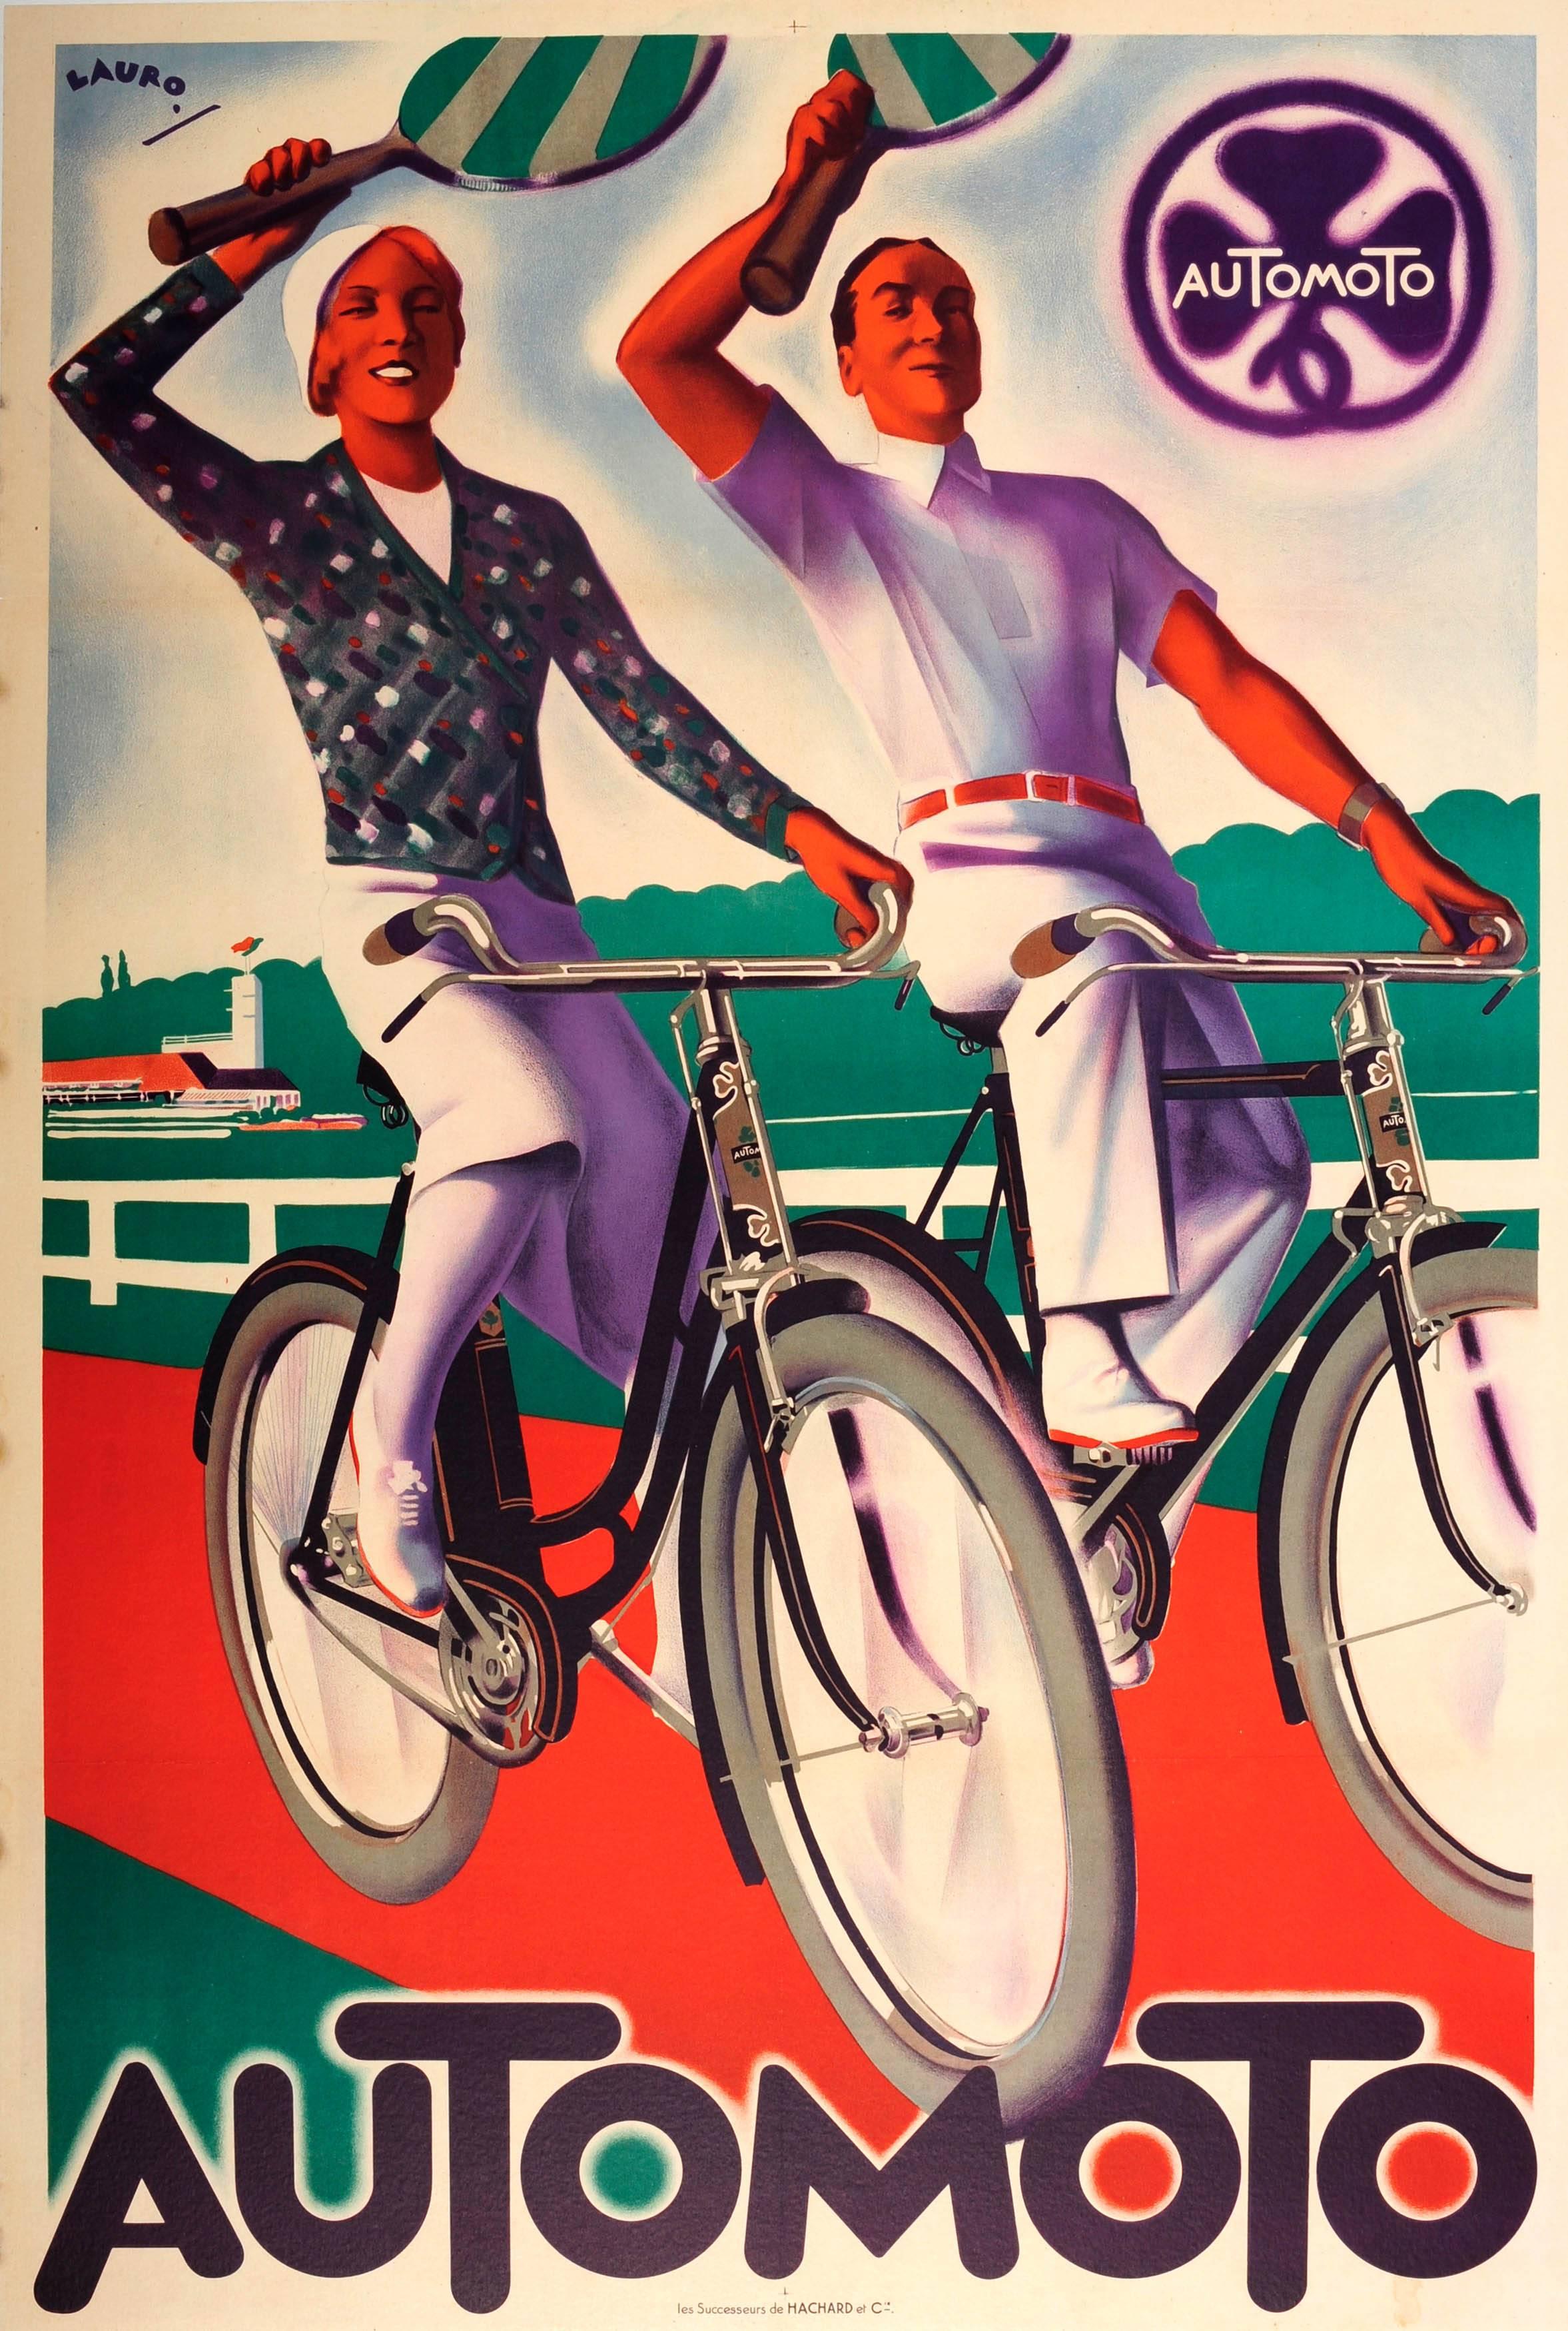 Maurice Lauro Print - Original Vintage Art Deco Poster Advertising The French Bicycle Company Automoto